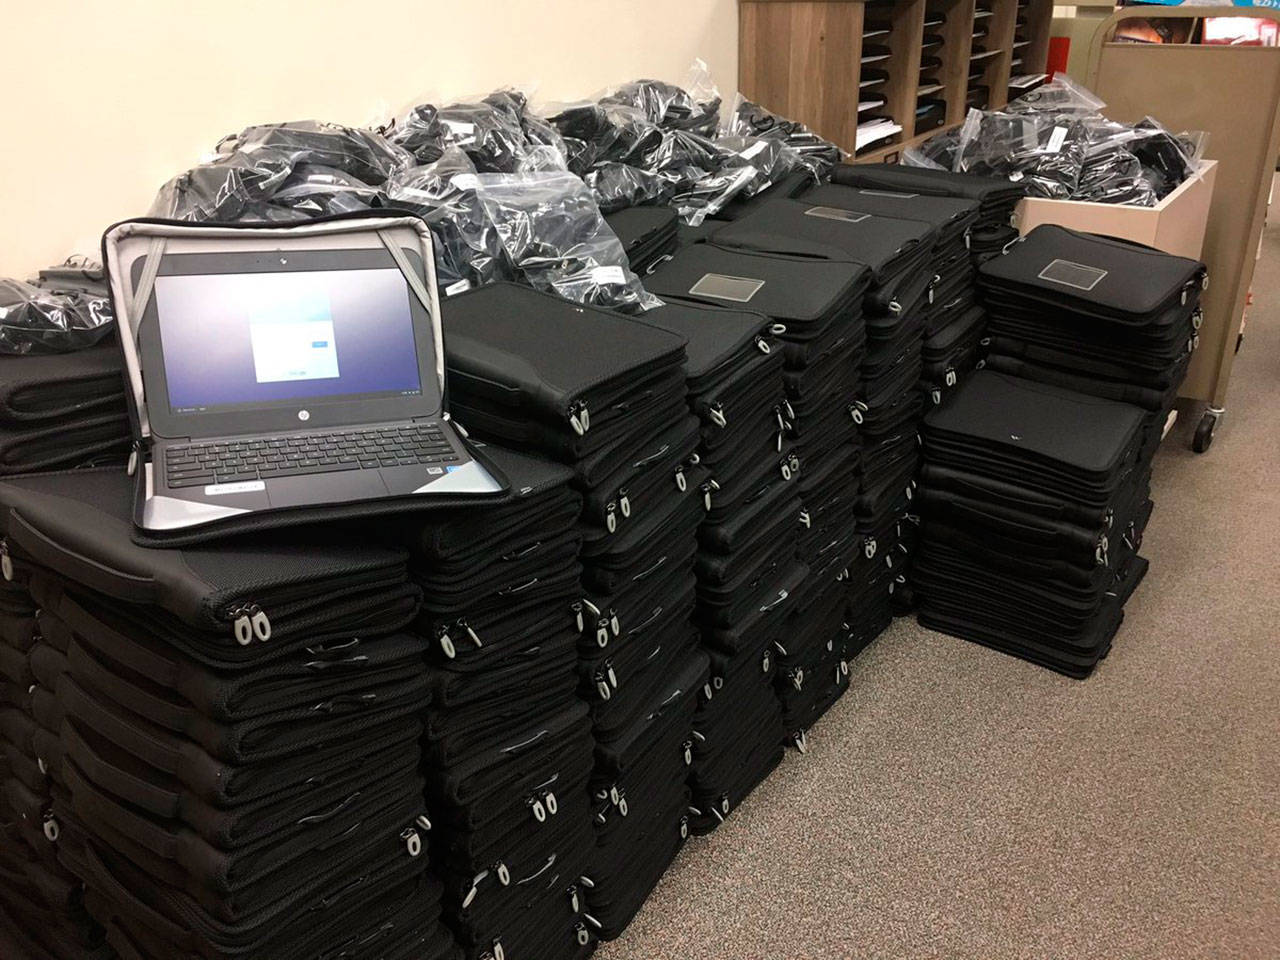 The Auburn School Distict is making sure students and teachers are equipped with Chromebooks. COURTESY PHOTO